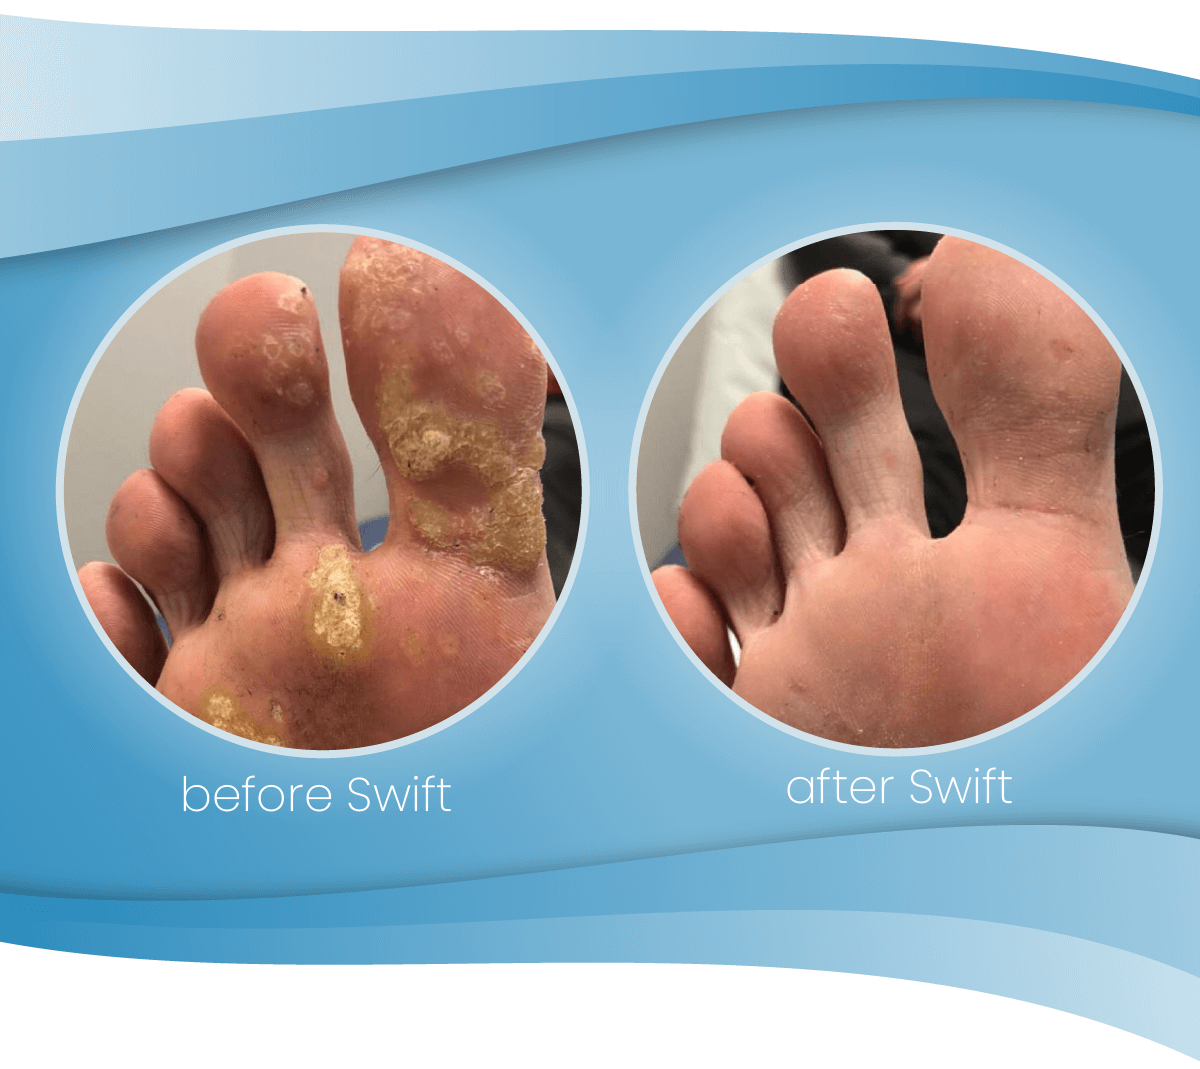 Graphic showing images of a foot before and after Swift treatment